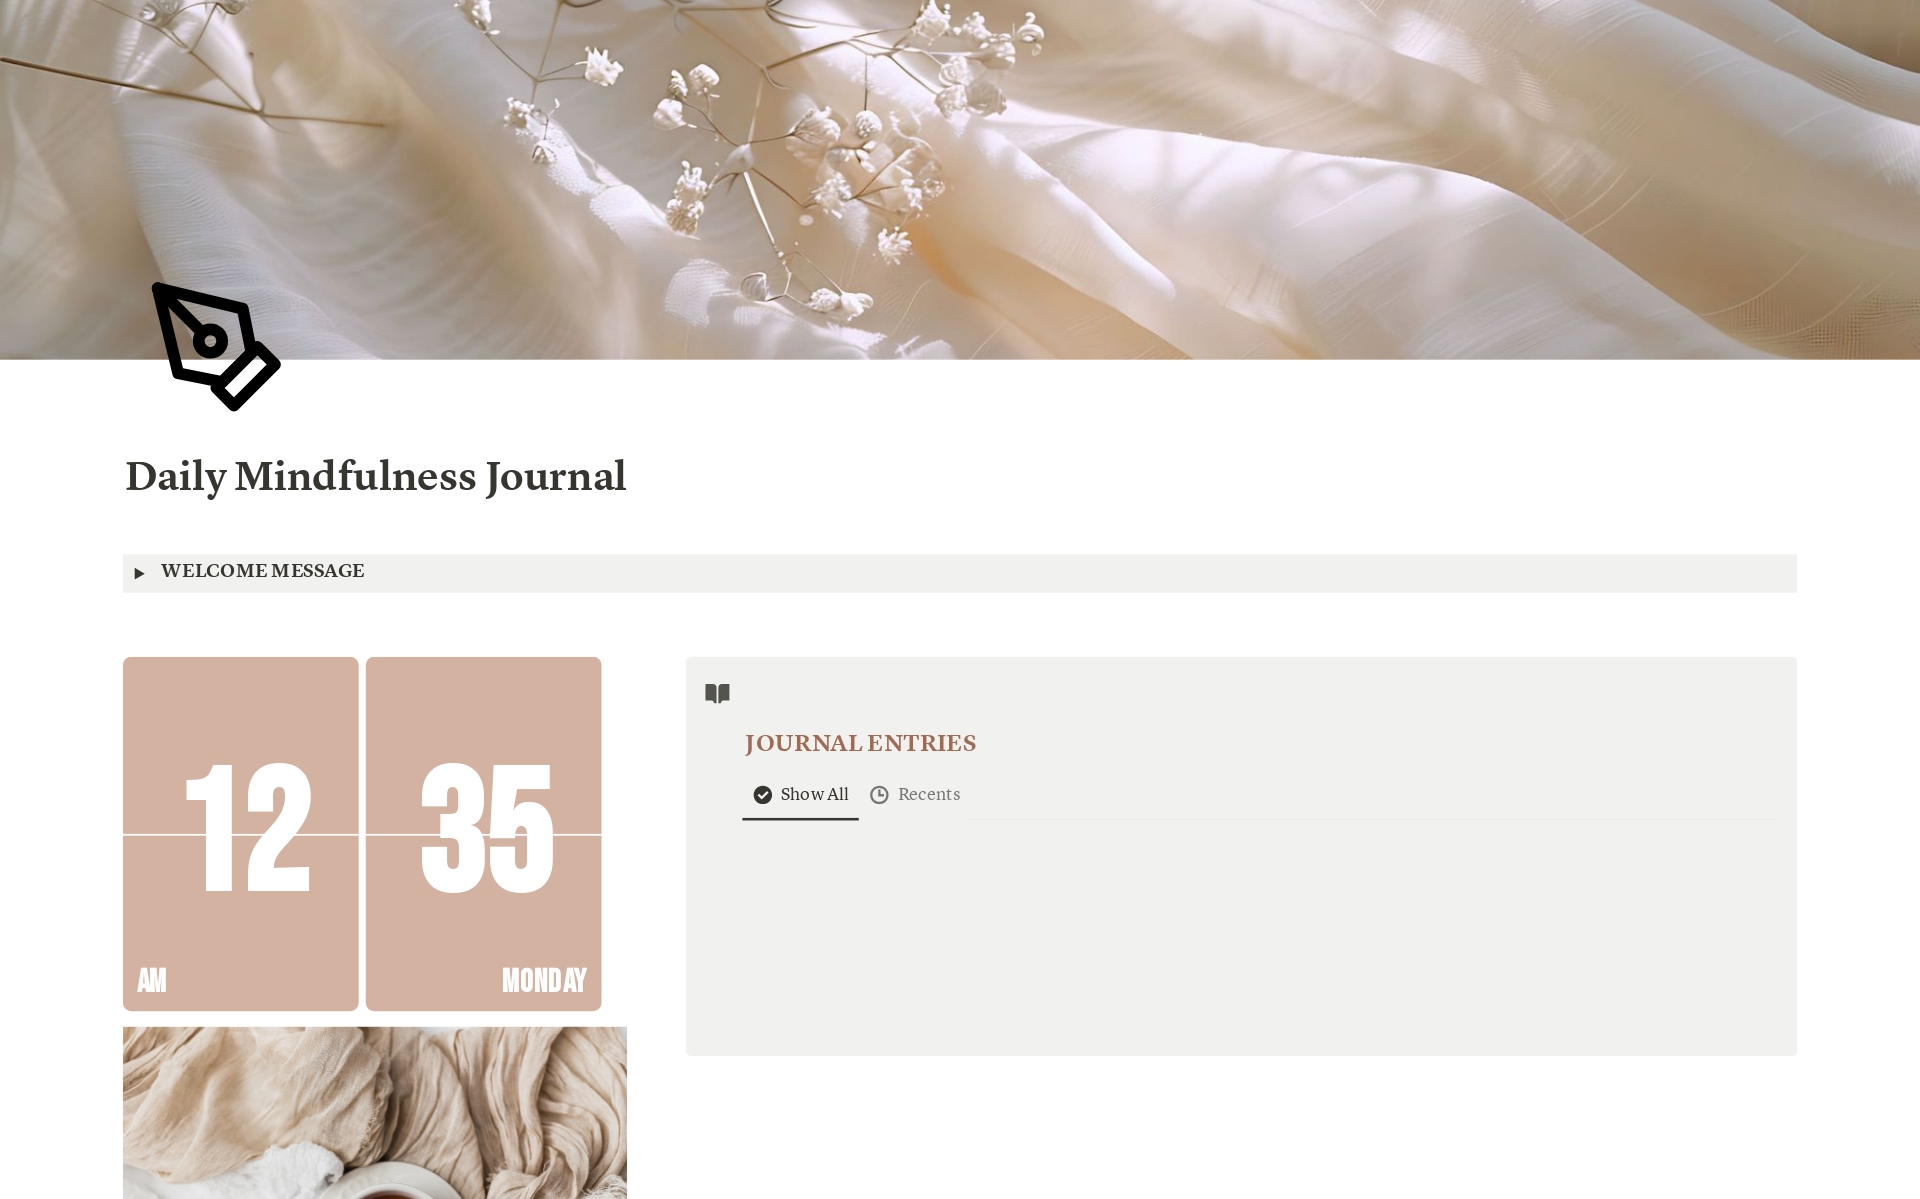 Cultivate more mindfulness with the Daily Mindfulness Journal!